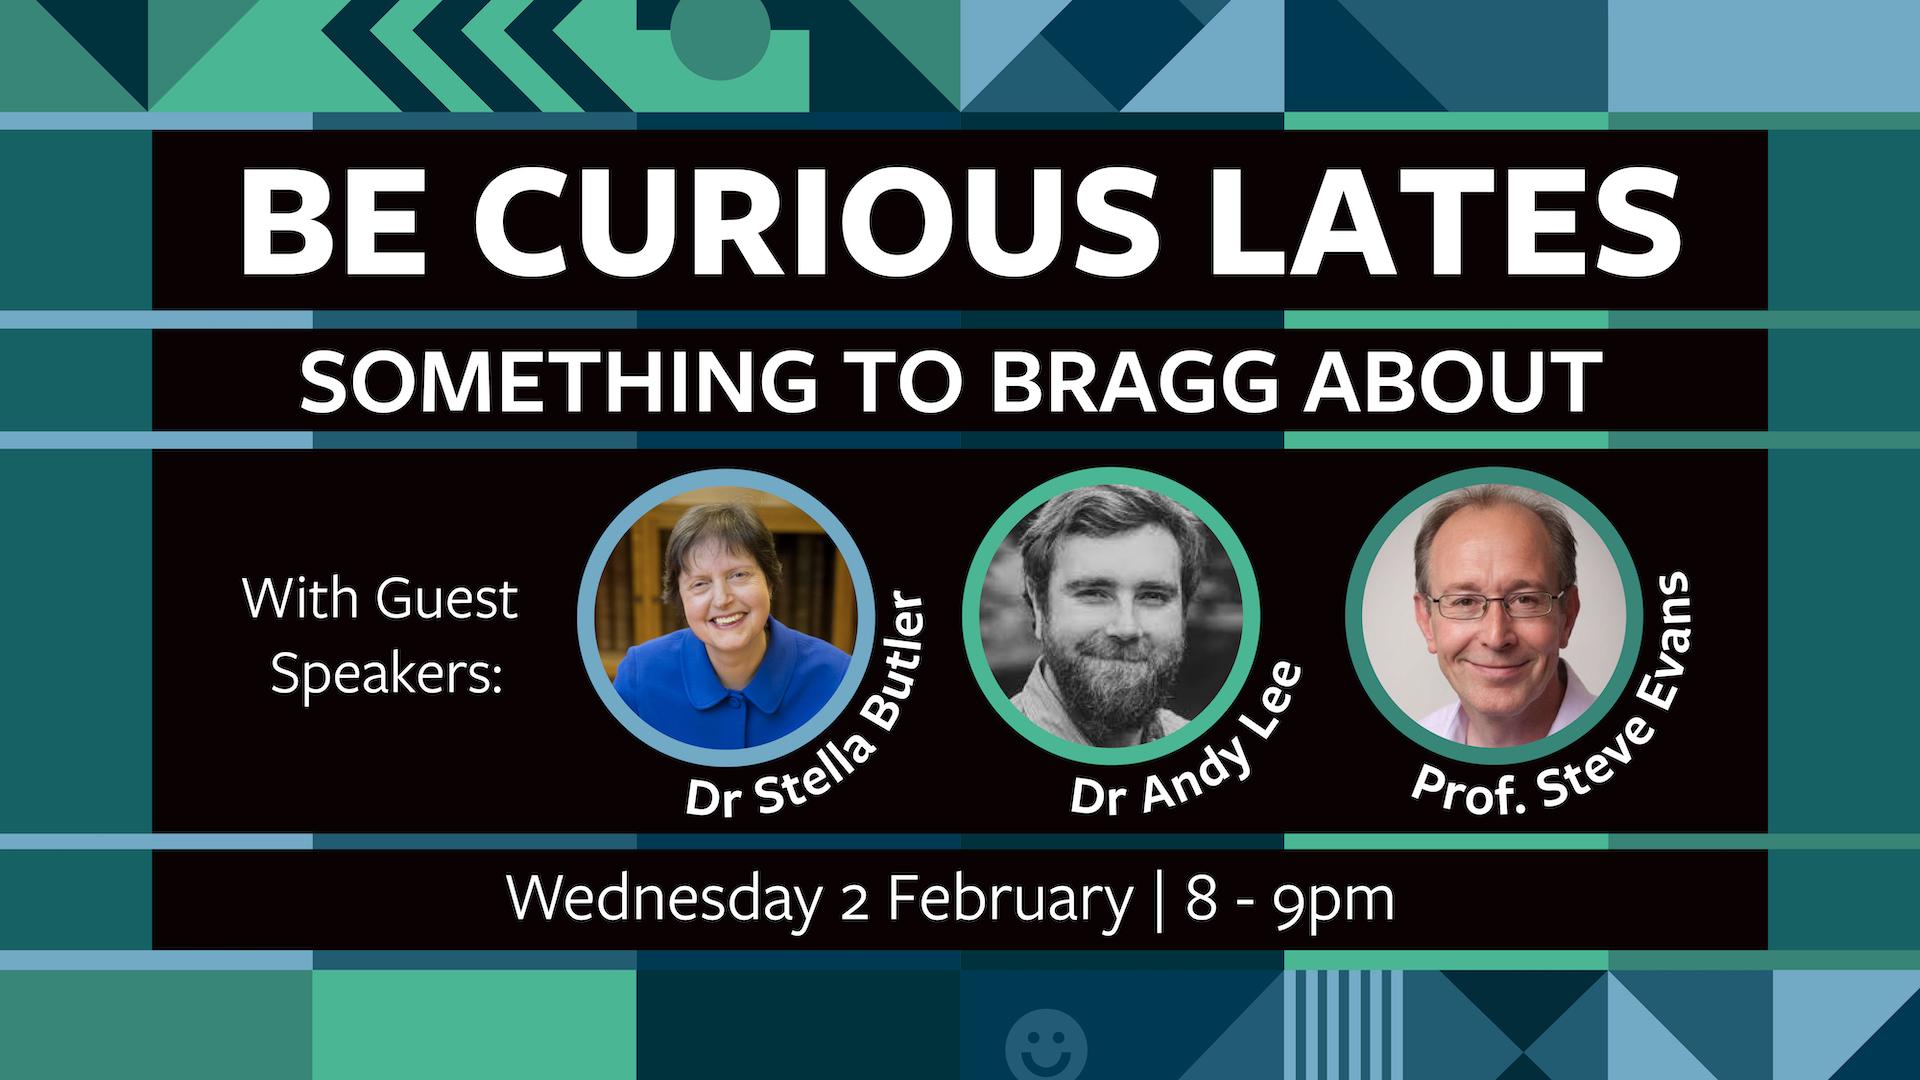 Be Curious LATES: something to Bragg about